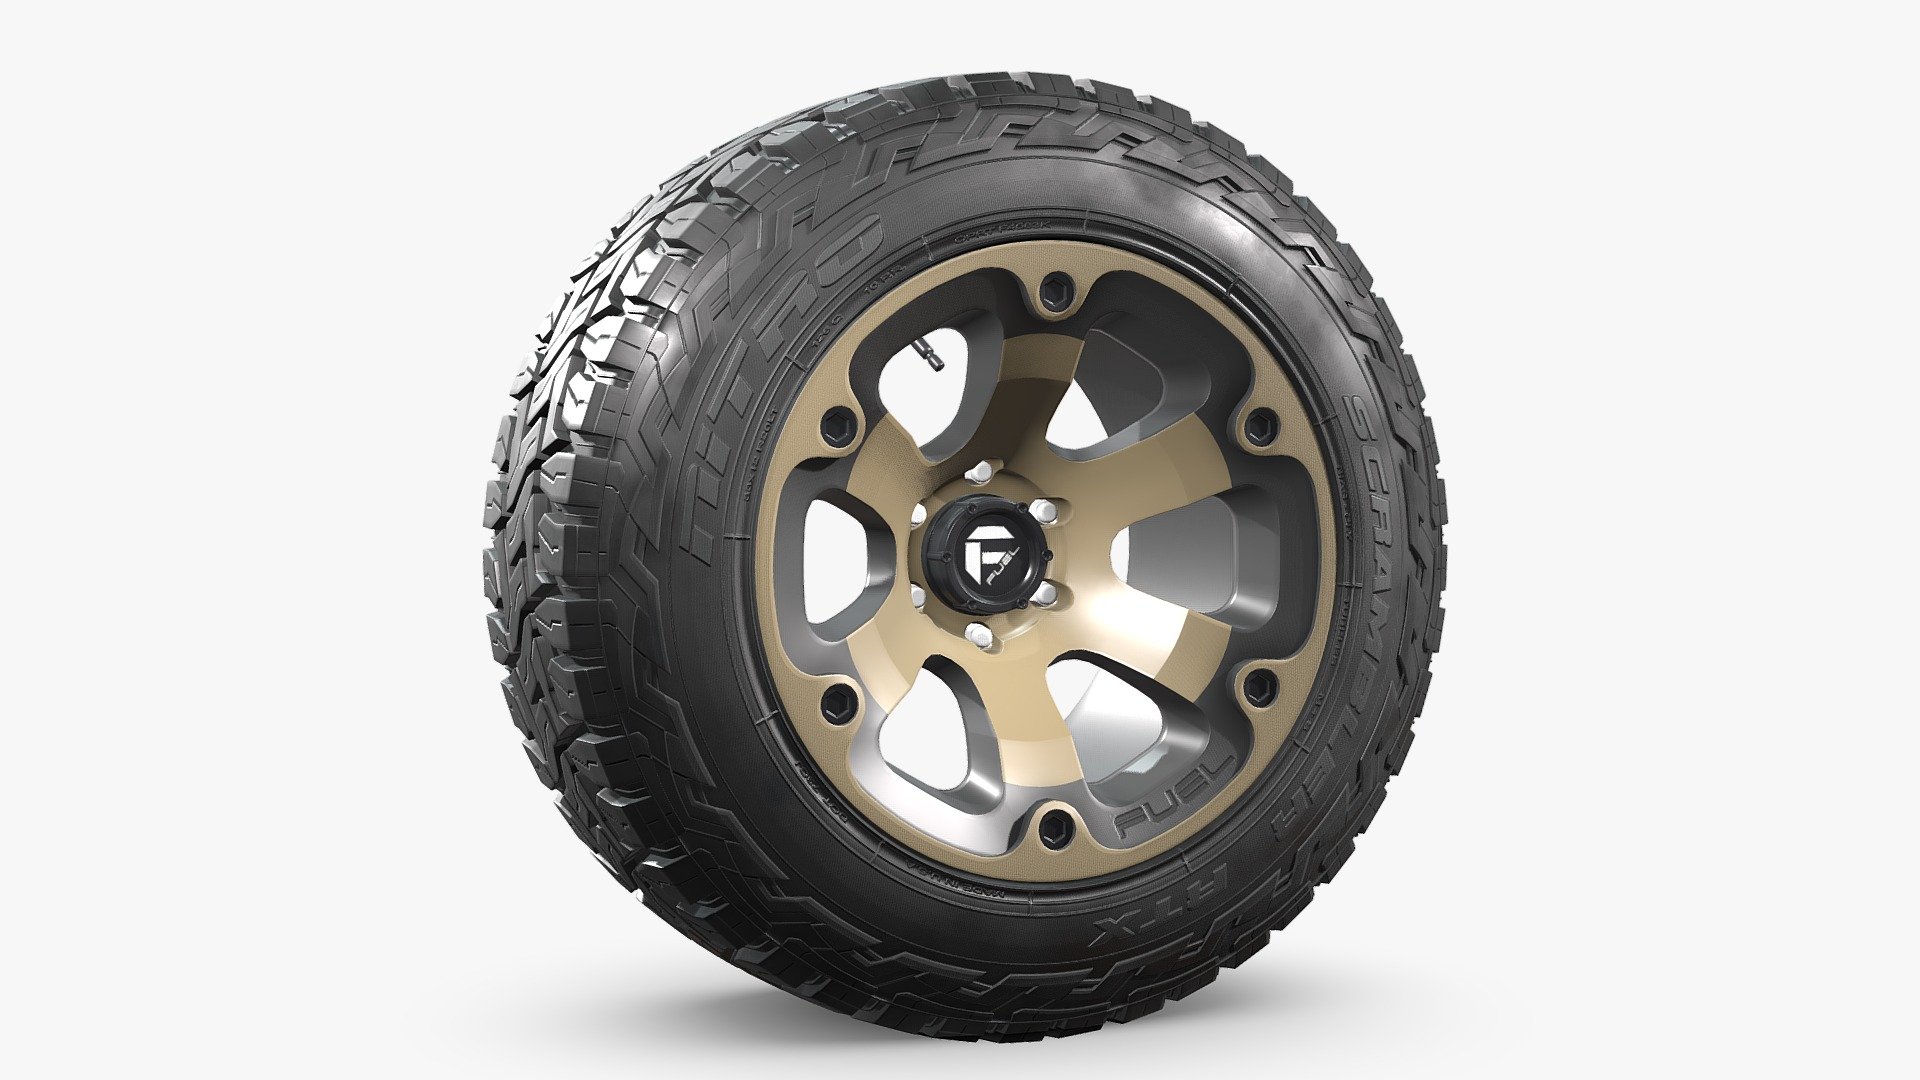 NN 3D store.

3D model of an off road wheel and tire combo.

The model is fully textured and was created with 3DS Max 2016 using the open subdivision modifier which has been left in the stack. There is also a Blender version.

The model has 33.000 polygons with subdivision level at 0 and 132.000 at level 1.

Scale/transform is set to 100%, units are set to centimeters, texture paths are stripped and and it is made to real world scale.

FBX, OBJ and 3DS files have been included in separated HI and LO subdivision versions.

Renderer: V Ray and Cycles.

All materials and textures are included and mapped in all files, settings might have to be adjusted depending on the software you are using.

JPG textures have 2048 x 2048 resolution 3d model